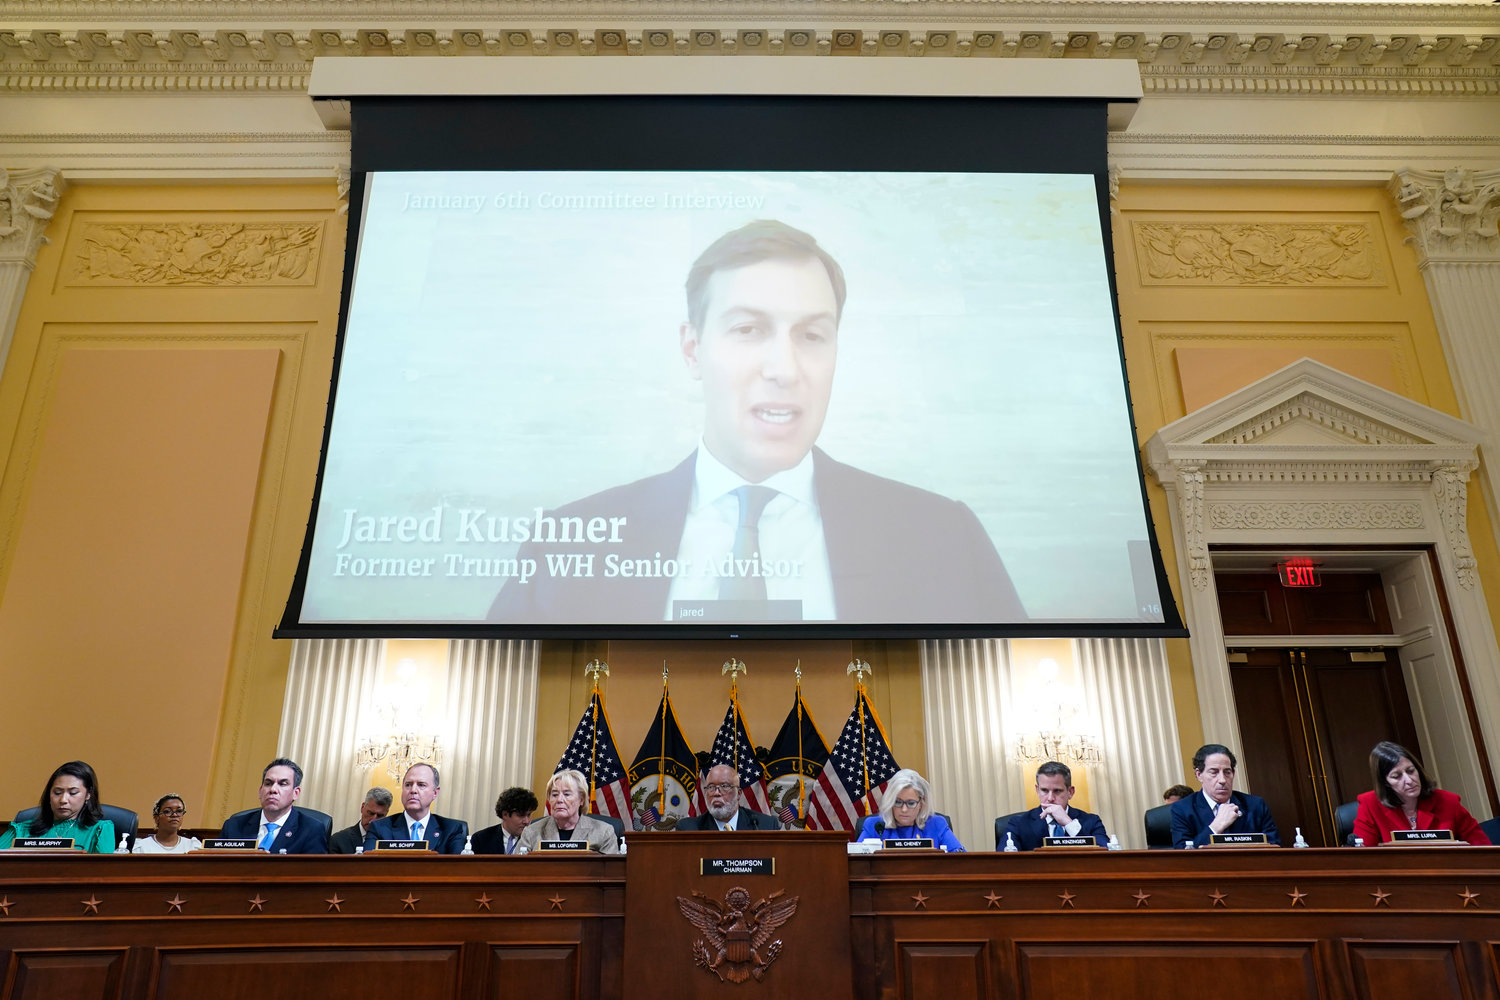 A video showing former White House Senior Advisor Jared Kushner speaking during an interview with the Jan. 6 Committee is shown at the House select committee investigating the Jan. 6 attack on the U.S. Capitol, hearing Thursday, June 9, 2022, on Capitol Hill in Washington. (AP Photo/Andrew Harnik)